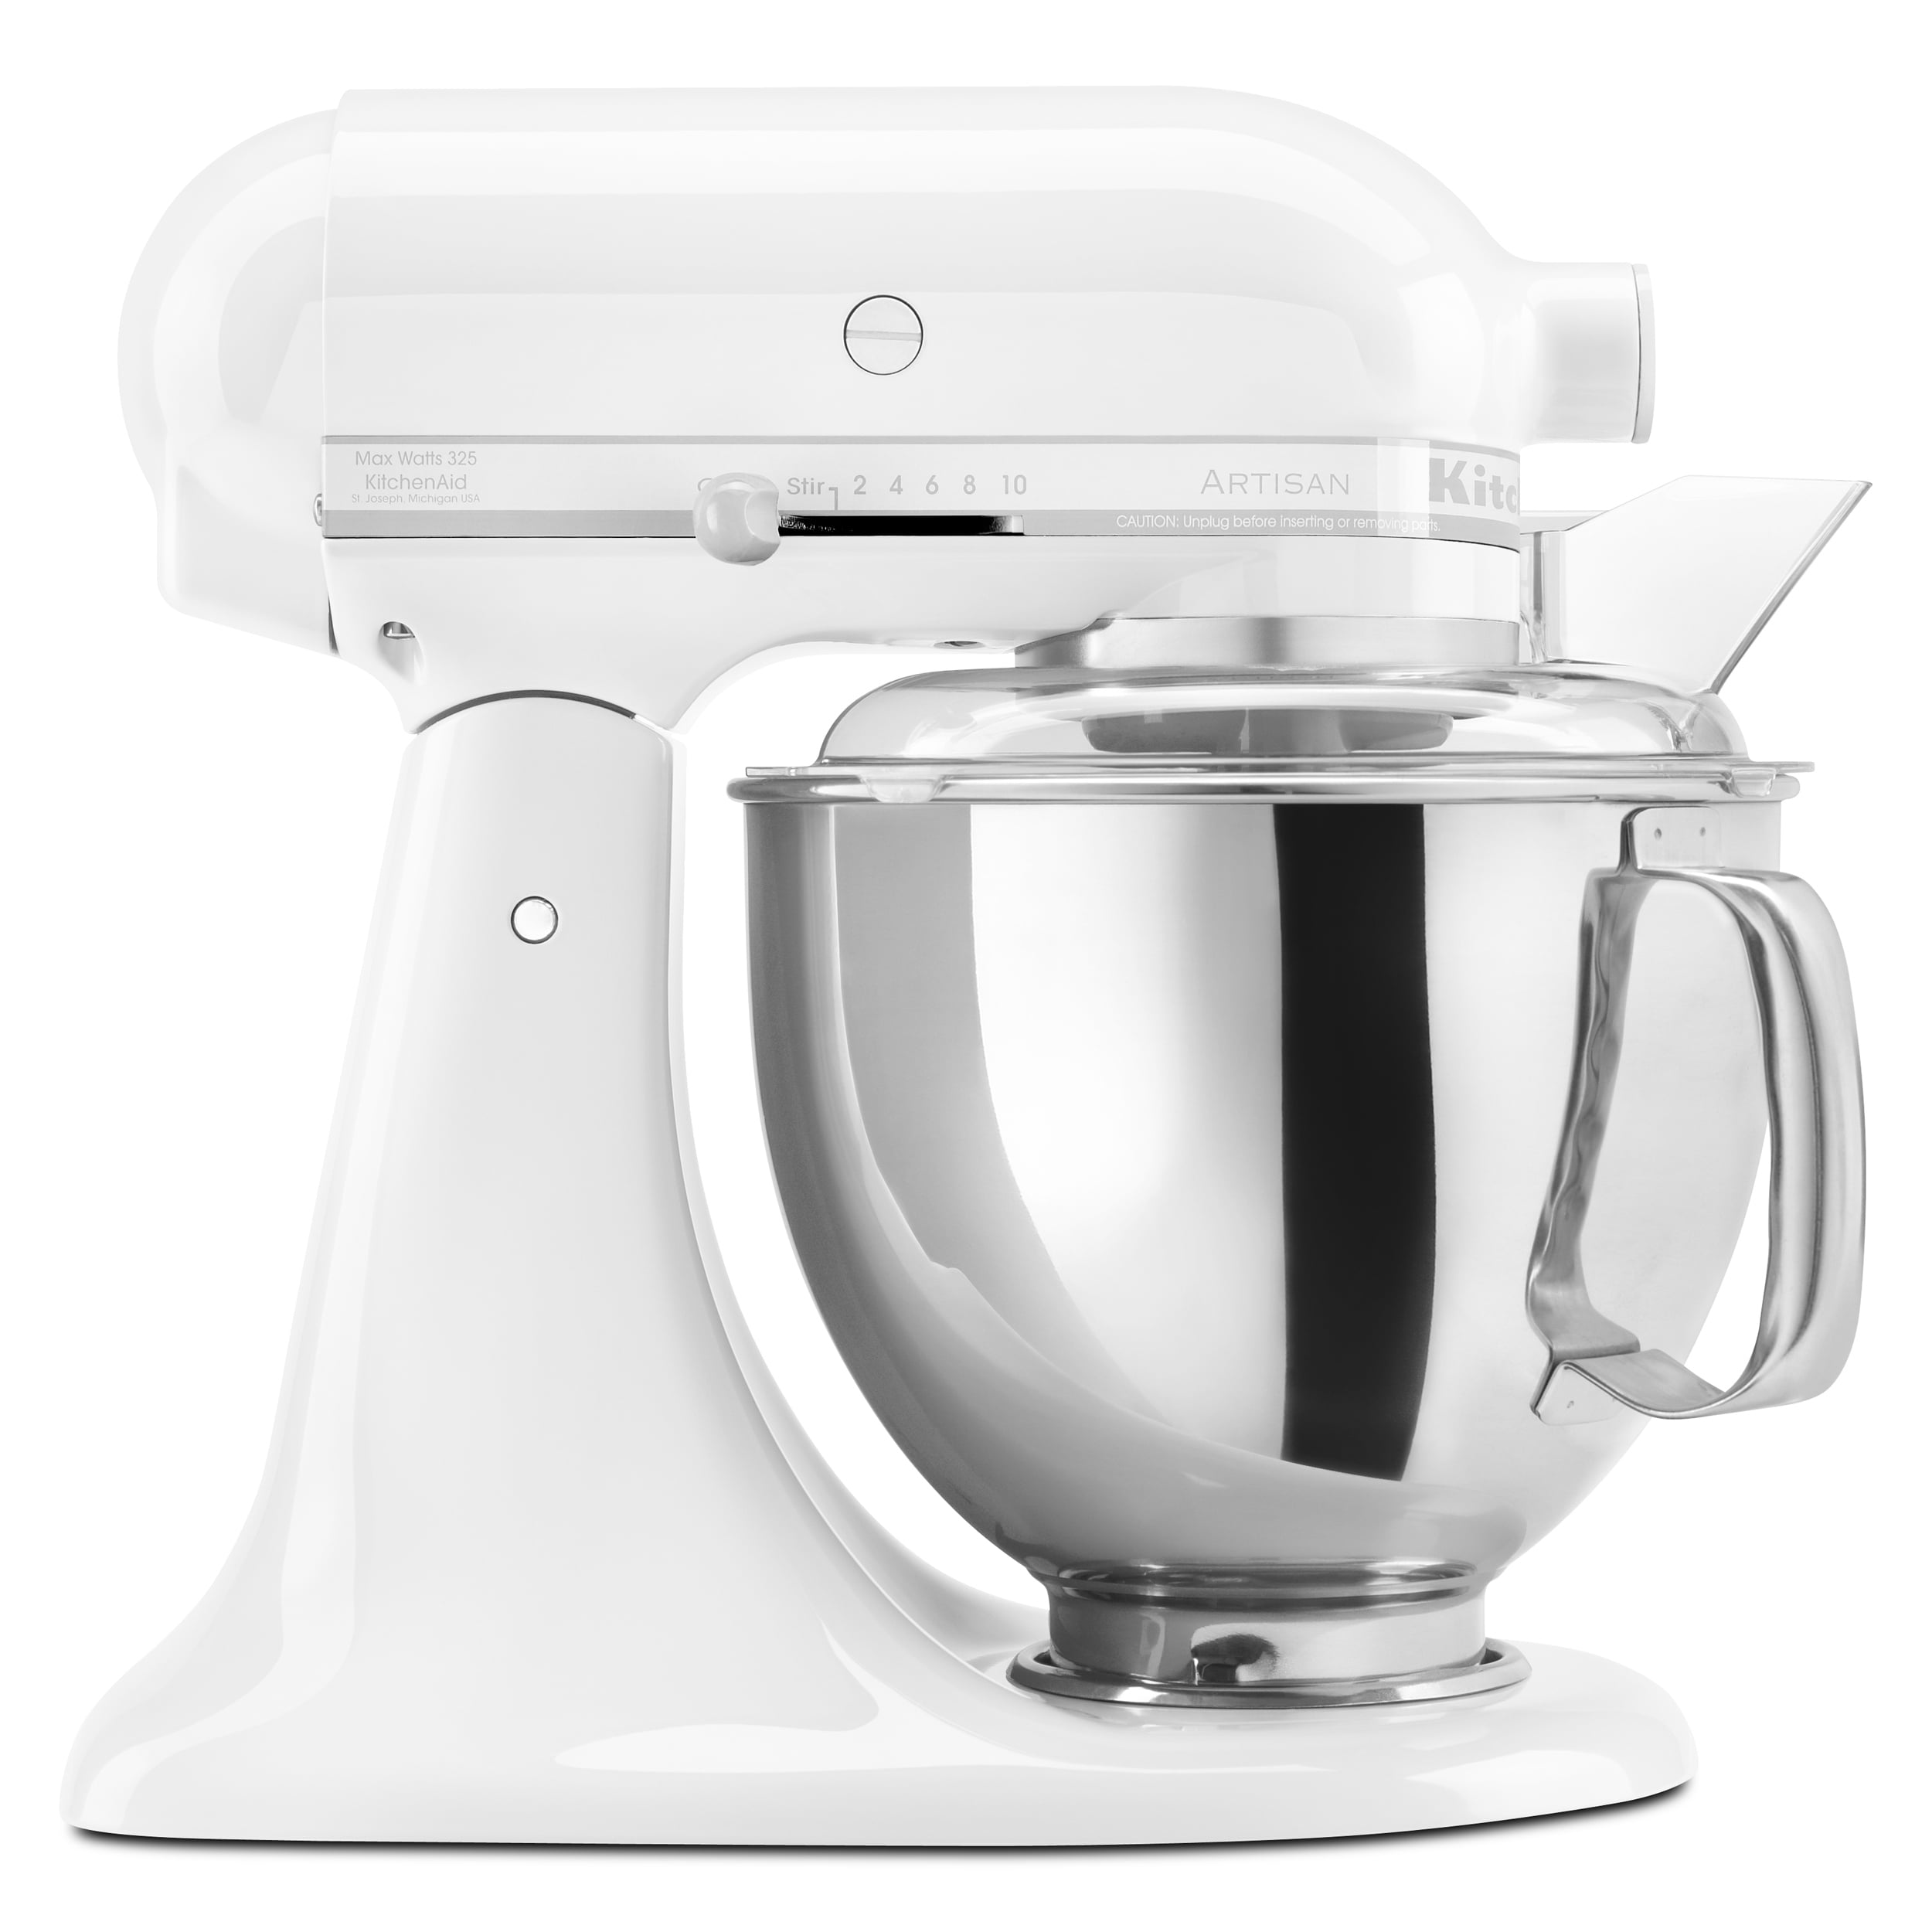 White KitchenAid Classic Tilt-Head Stand Mixer Works Great +Accessories  VG+Shape